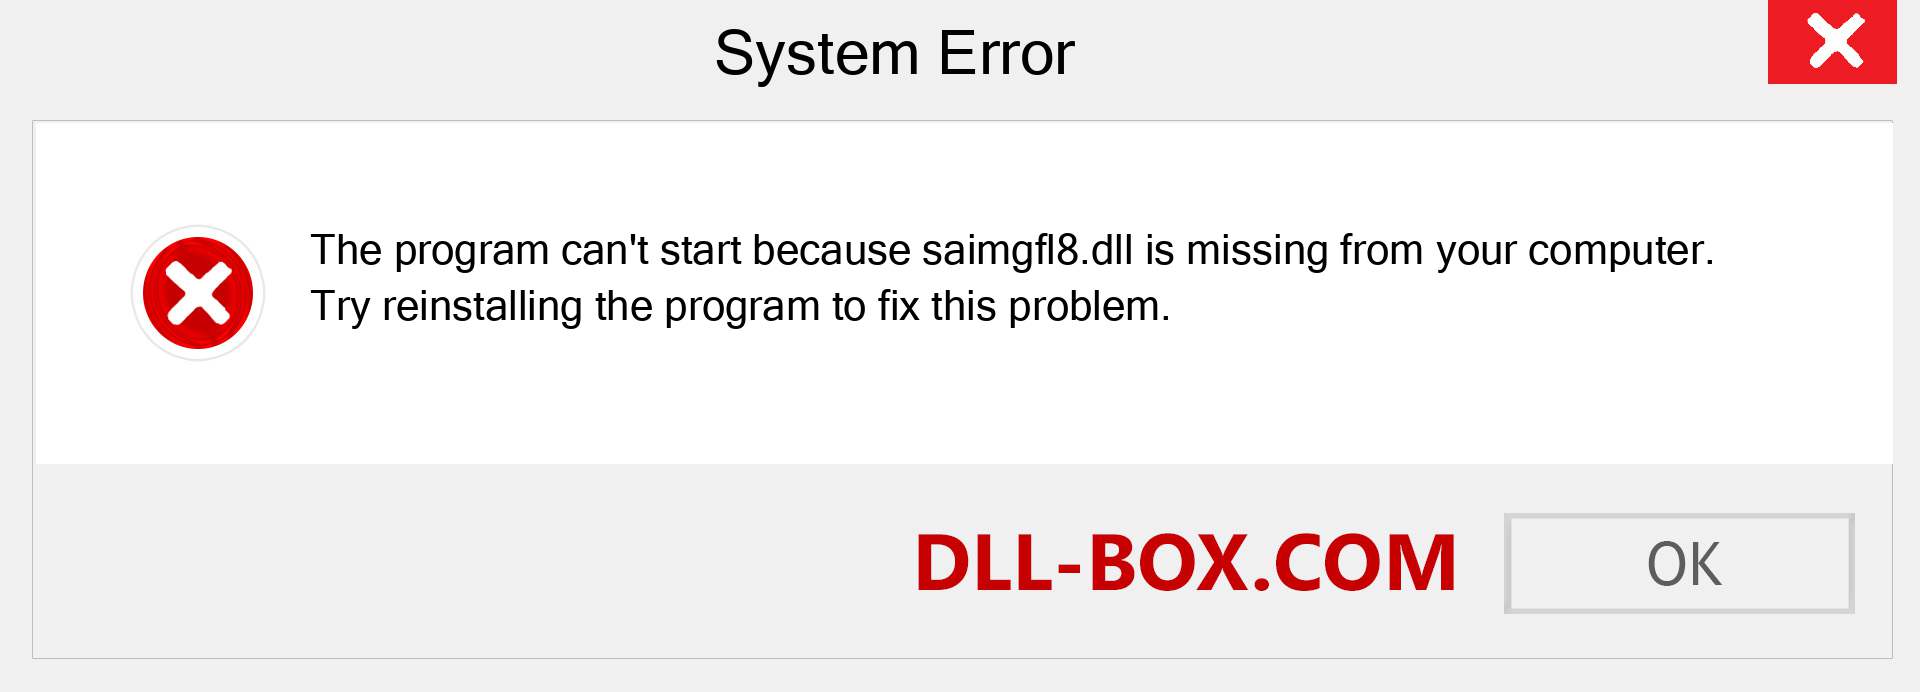  saimgfl8.dll file is missing?. Download for Windows 7, 8, 10 - Fix  saimgfl8 dll Missing Error on Windows, photos, images